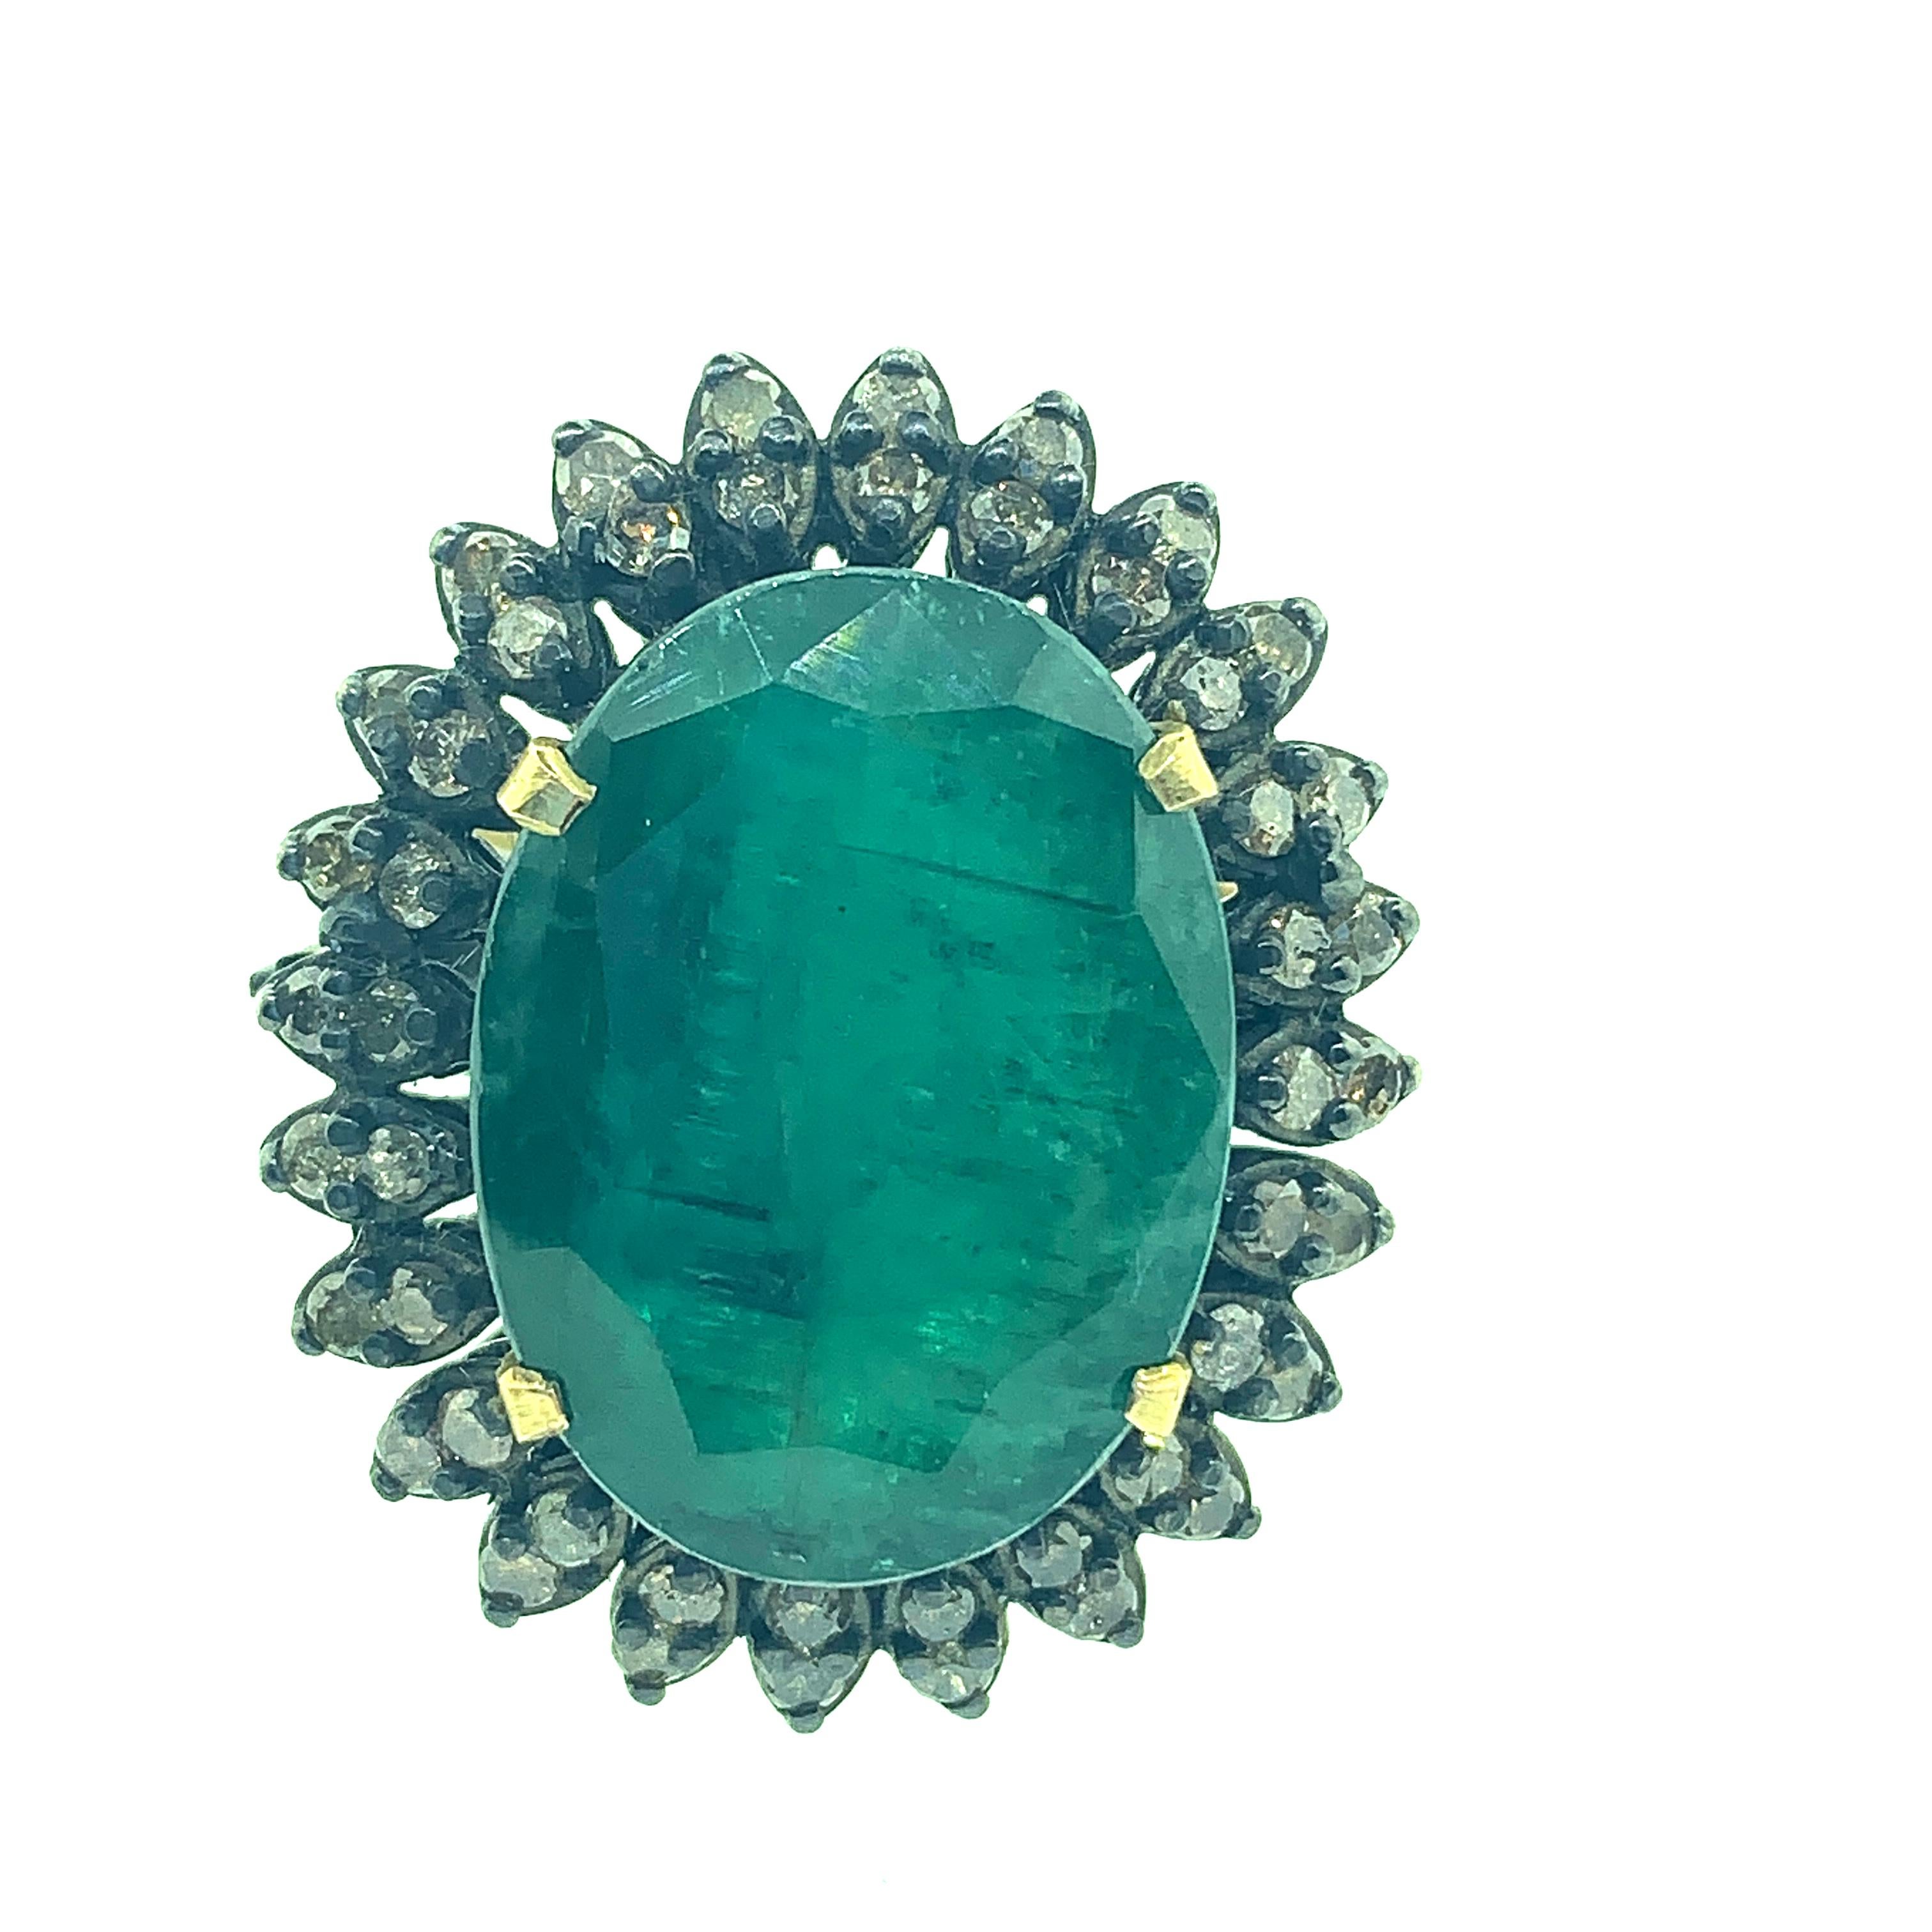 Contemporary 13.50 Carat Emerald, Diamond Ring in Oxidized Sterling Silver, 18 Karat Gold For Sale